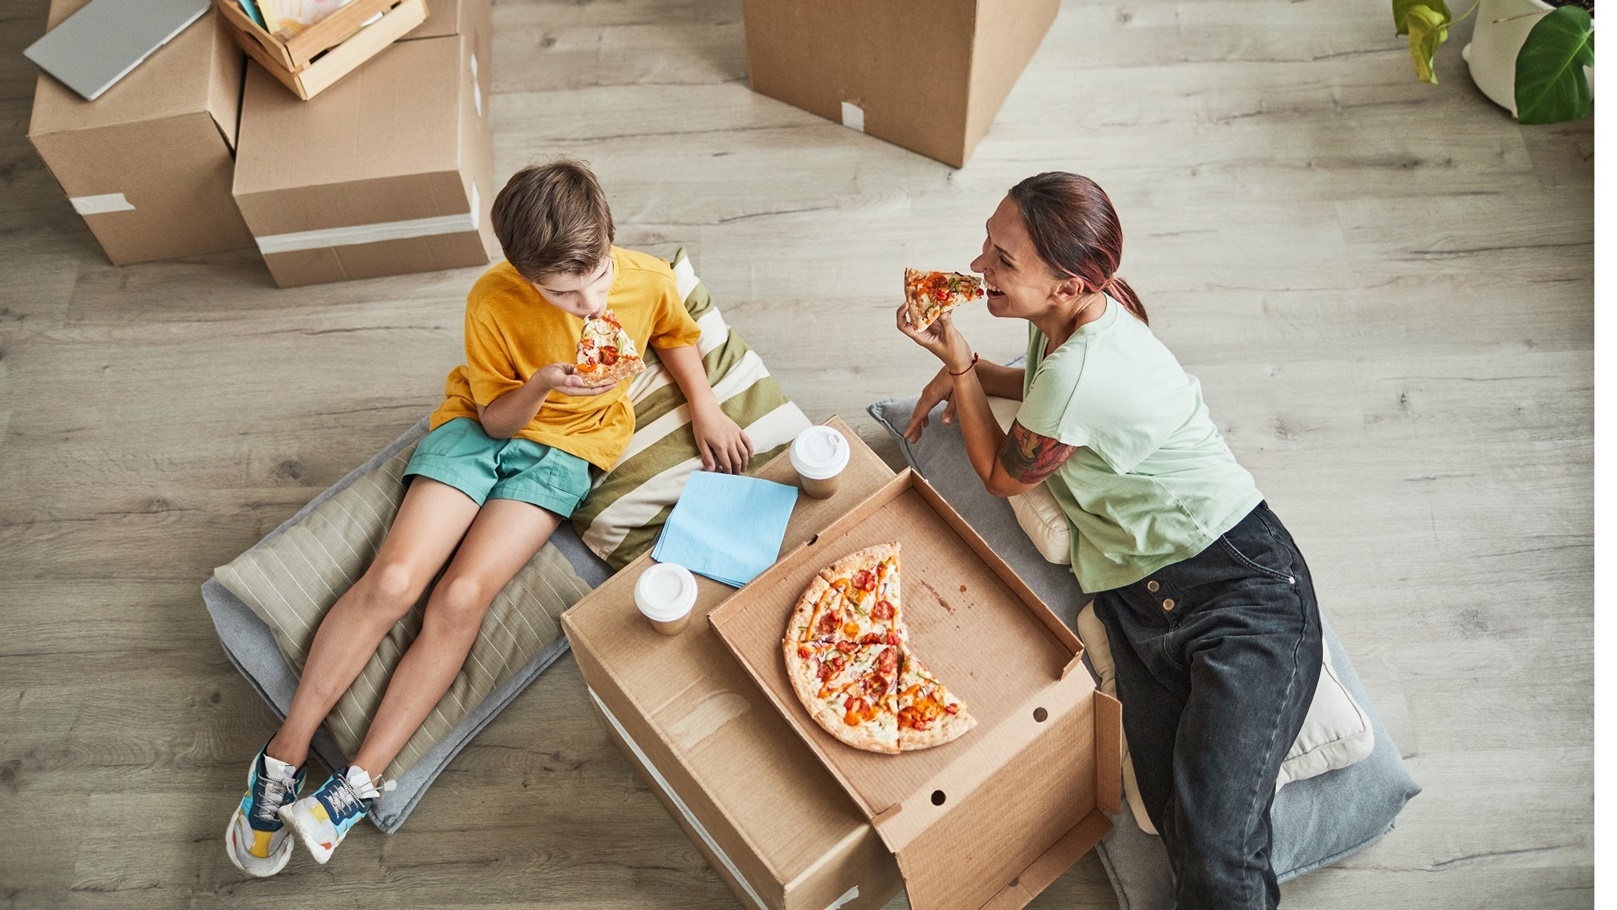 mother-and-son-eating-pizza-in-new-home-high-angle-2022-01-18-23-58-43-utc